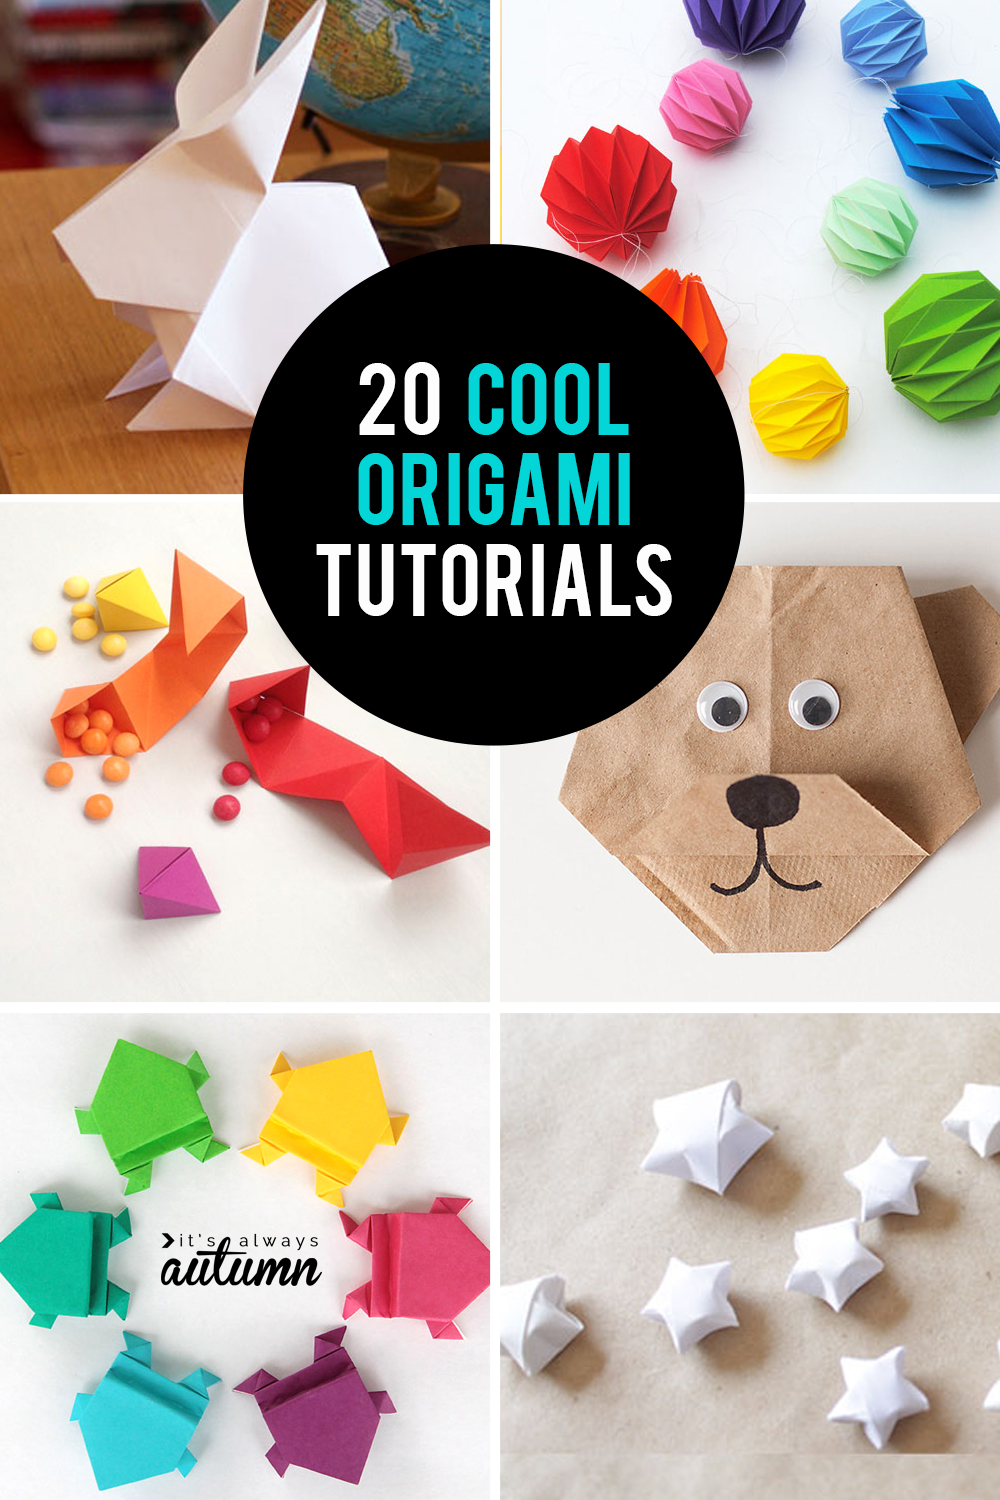 10 Fun Origami Projects for Kids